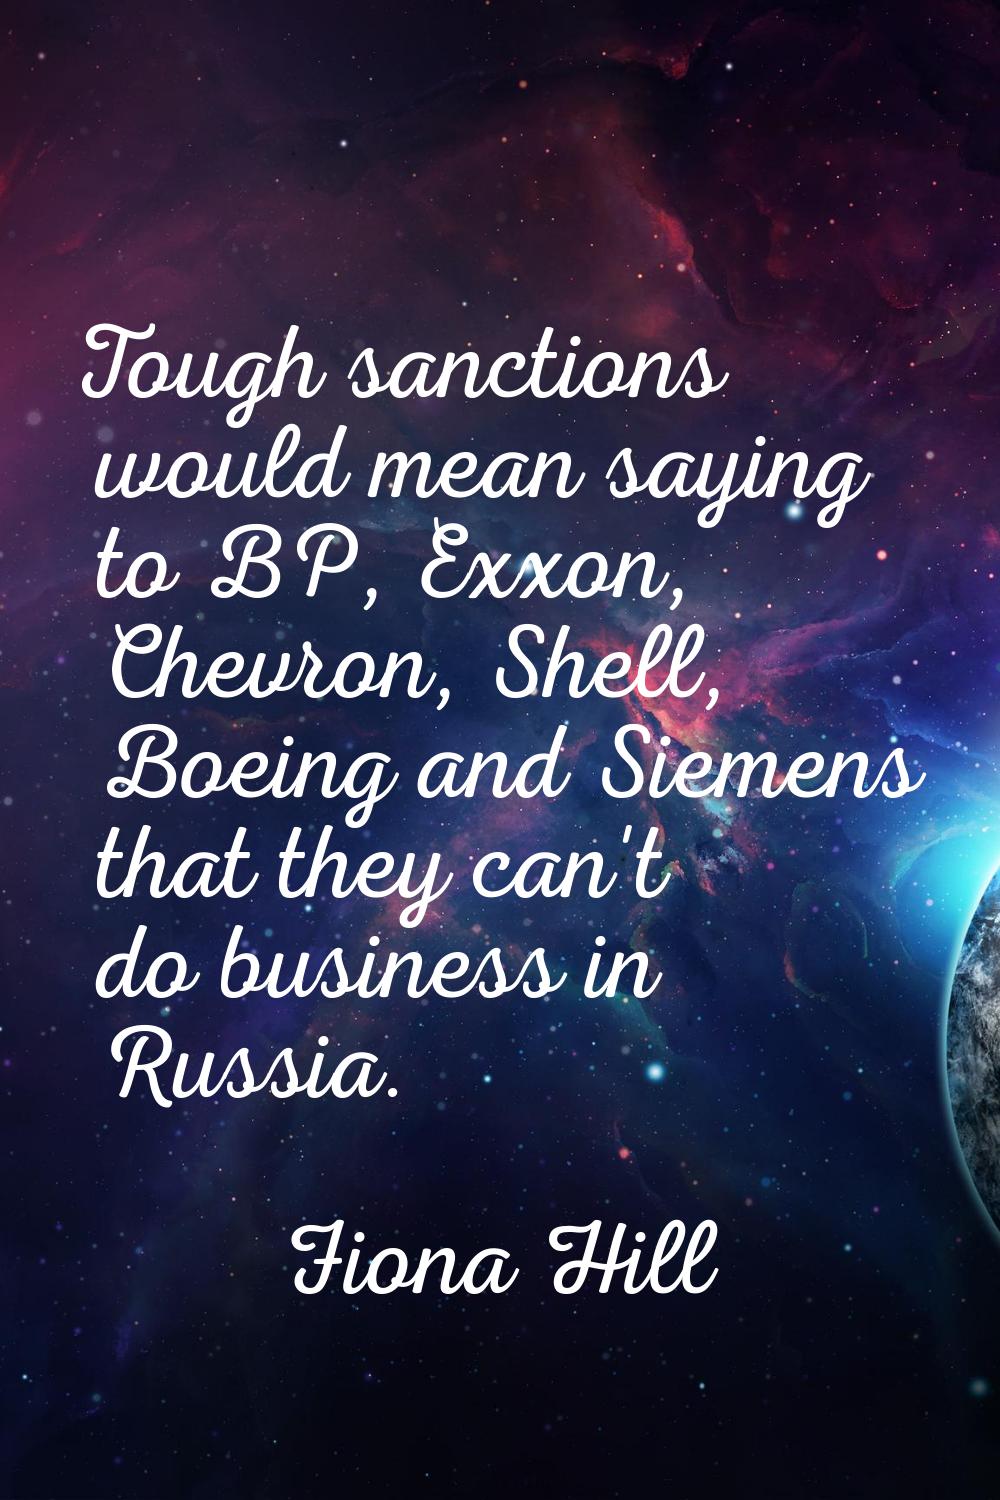 Tough sanctions would mean saying to BP, Exxon, Chevron, Shell, Boeing and Siemens that they can't 